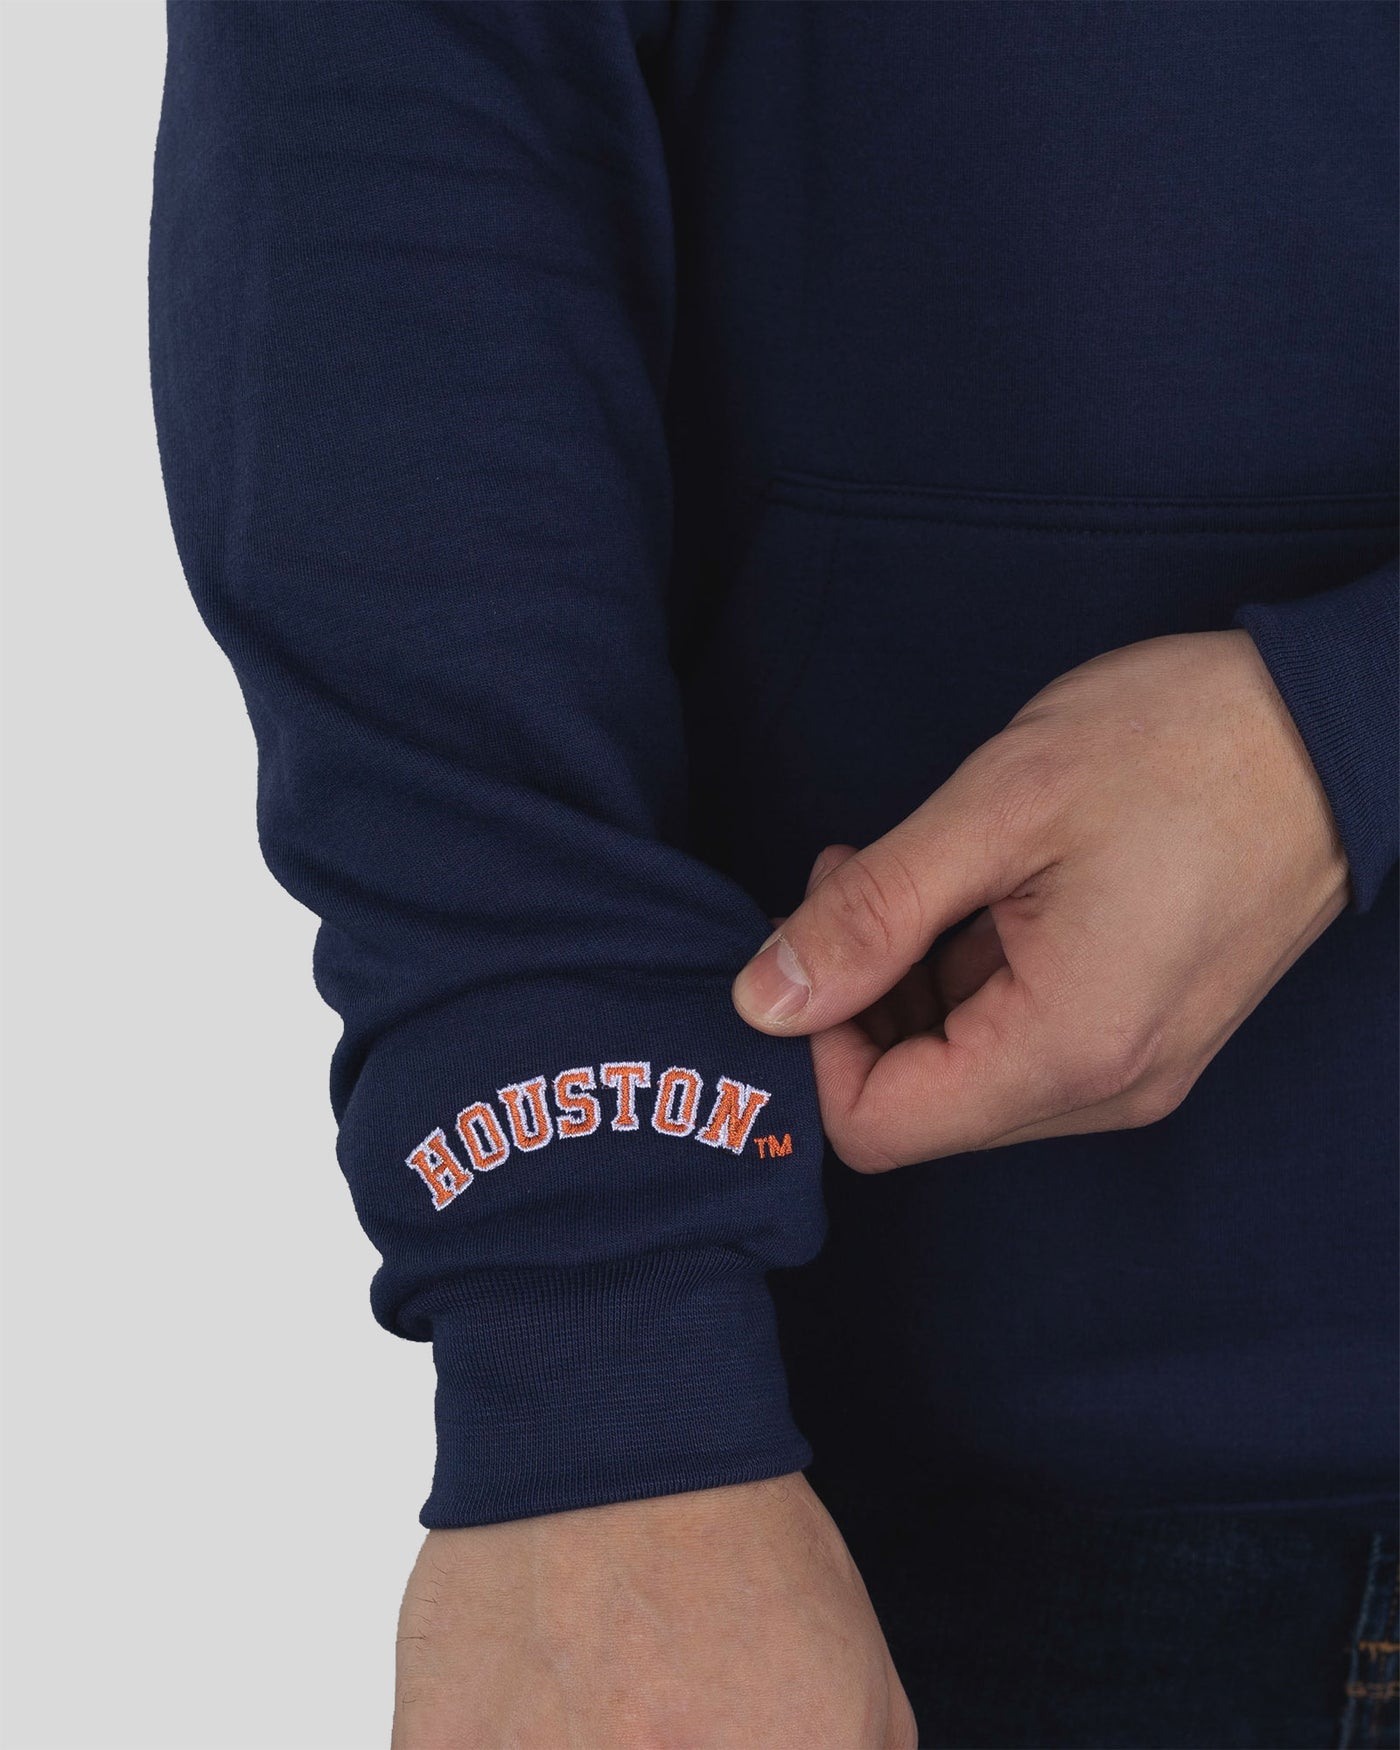 Outfield Fence Hoodie - Houston Astros